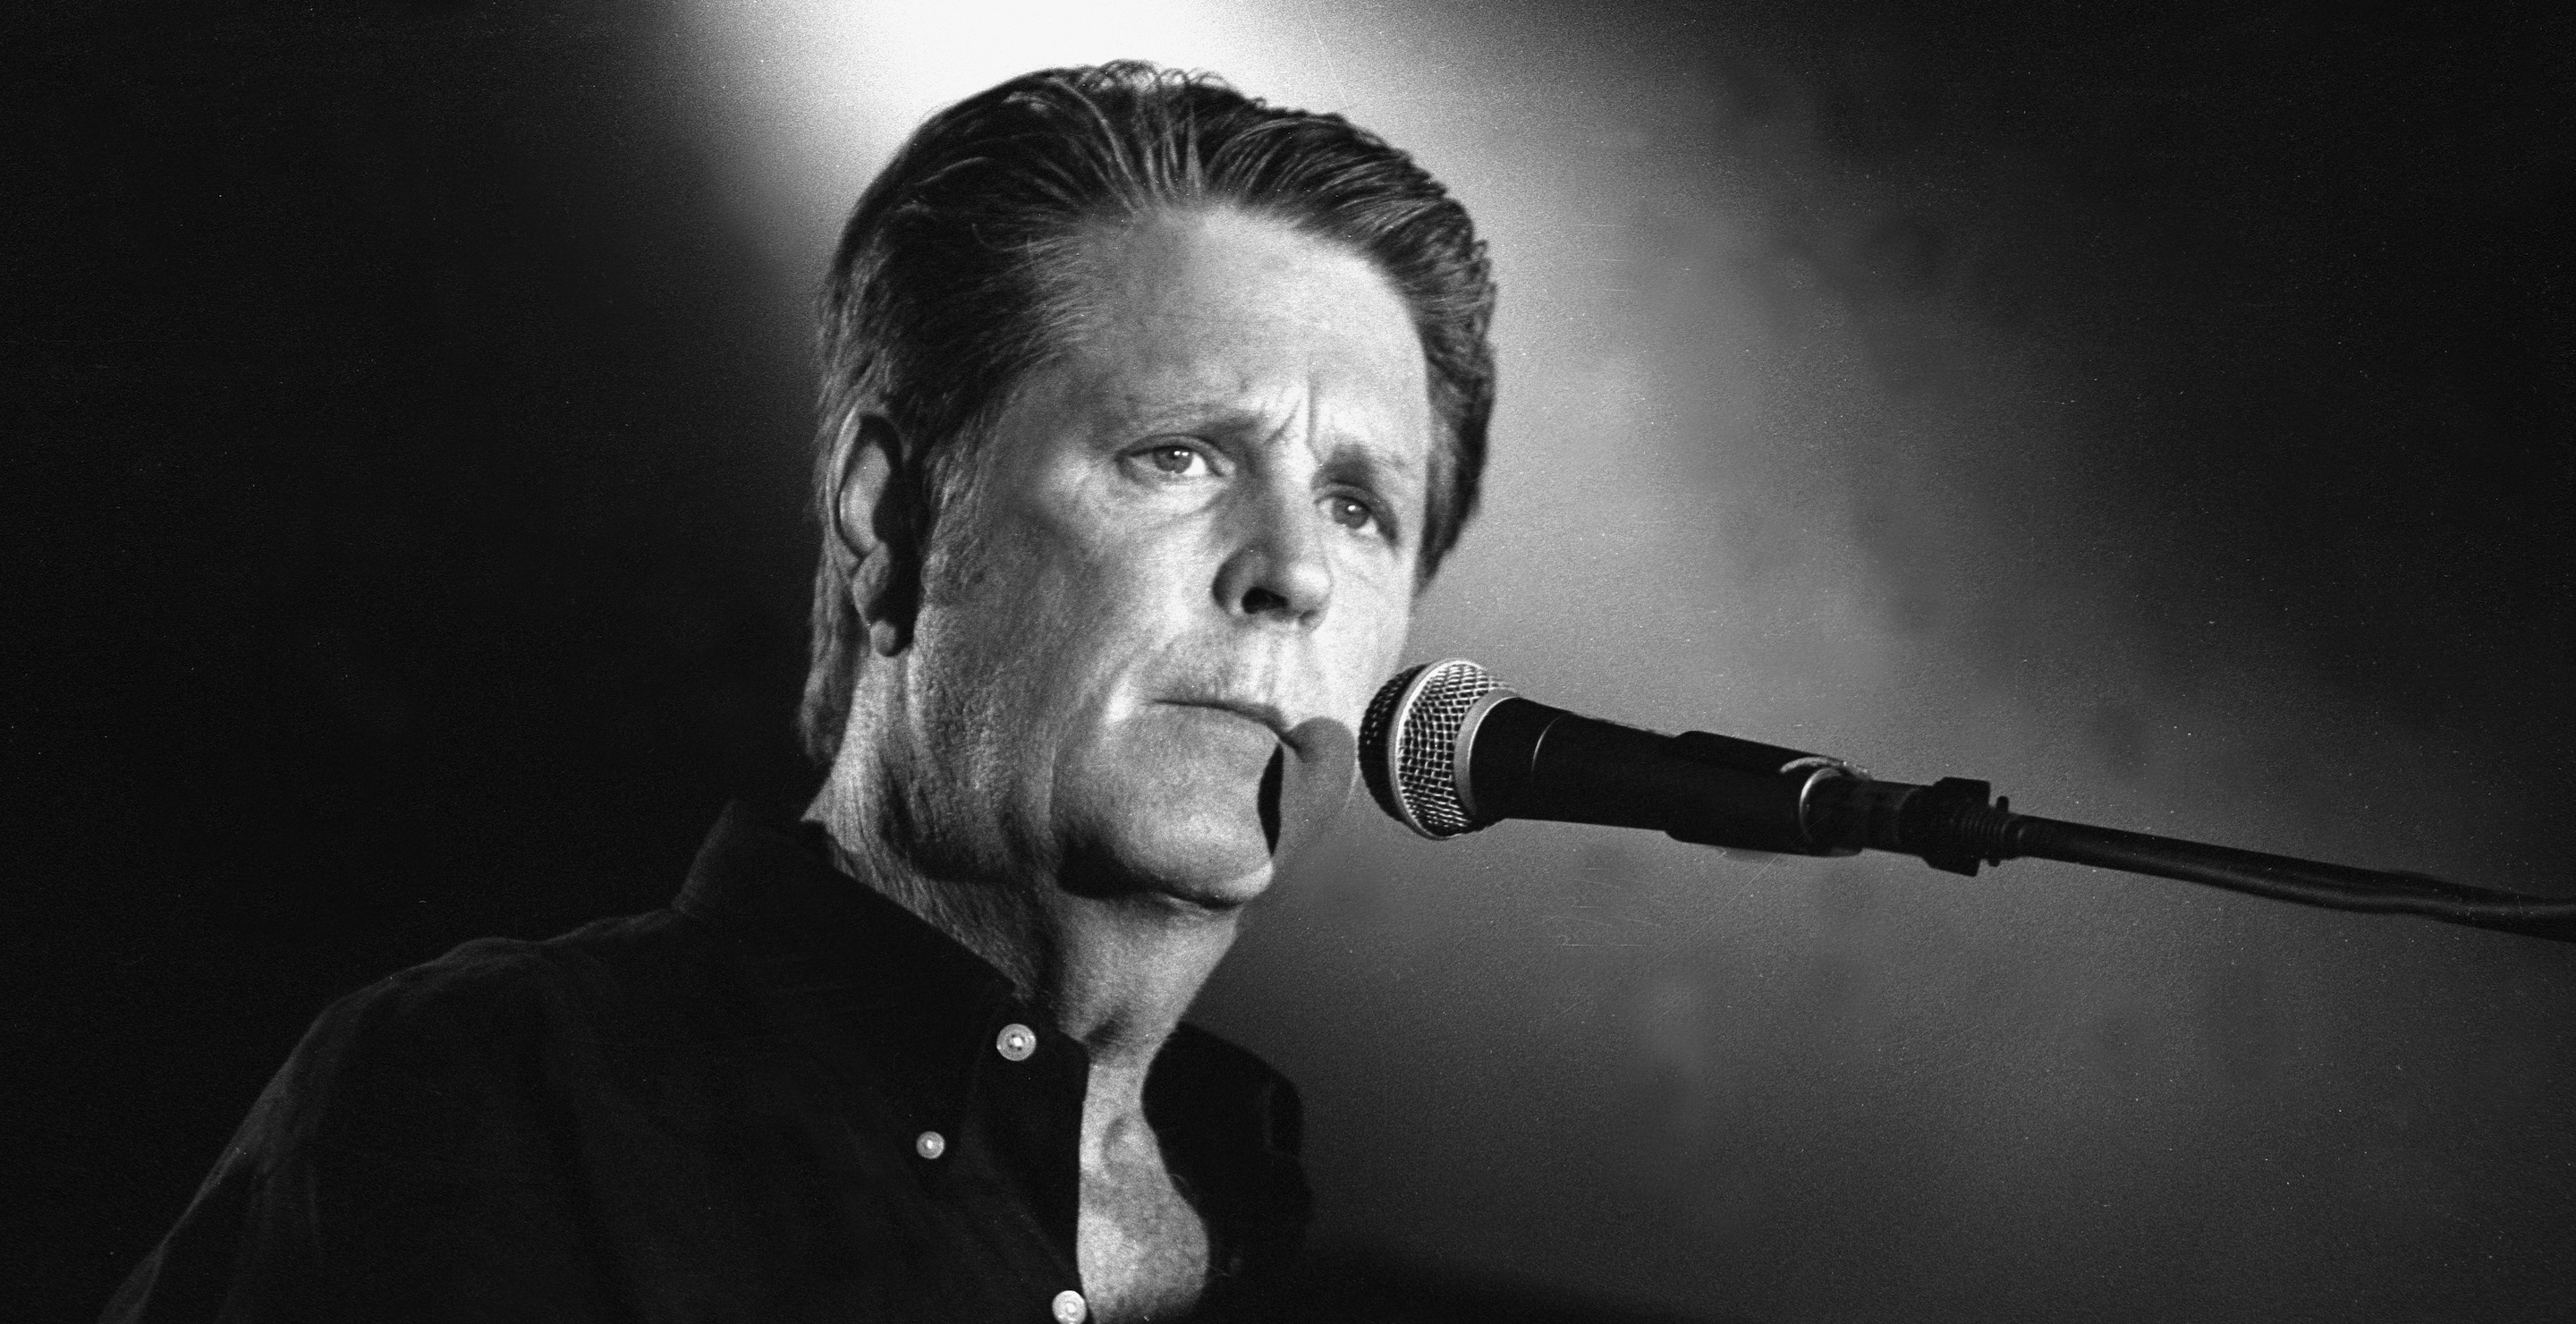 Grammy Award winning musician Brian Wilson, best known as the leader and chief songwriter of the Beach Boys, is shown performing on stage during a "live" concert appearance.